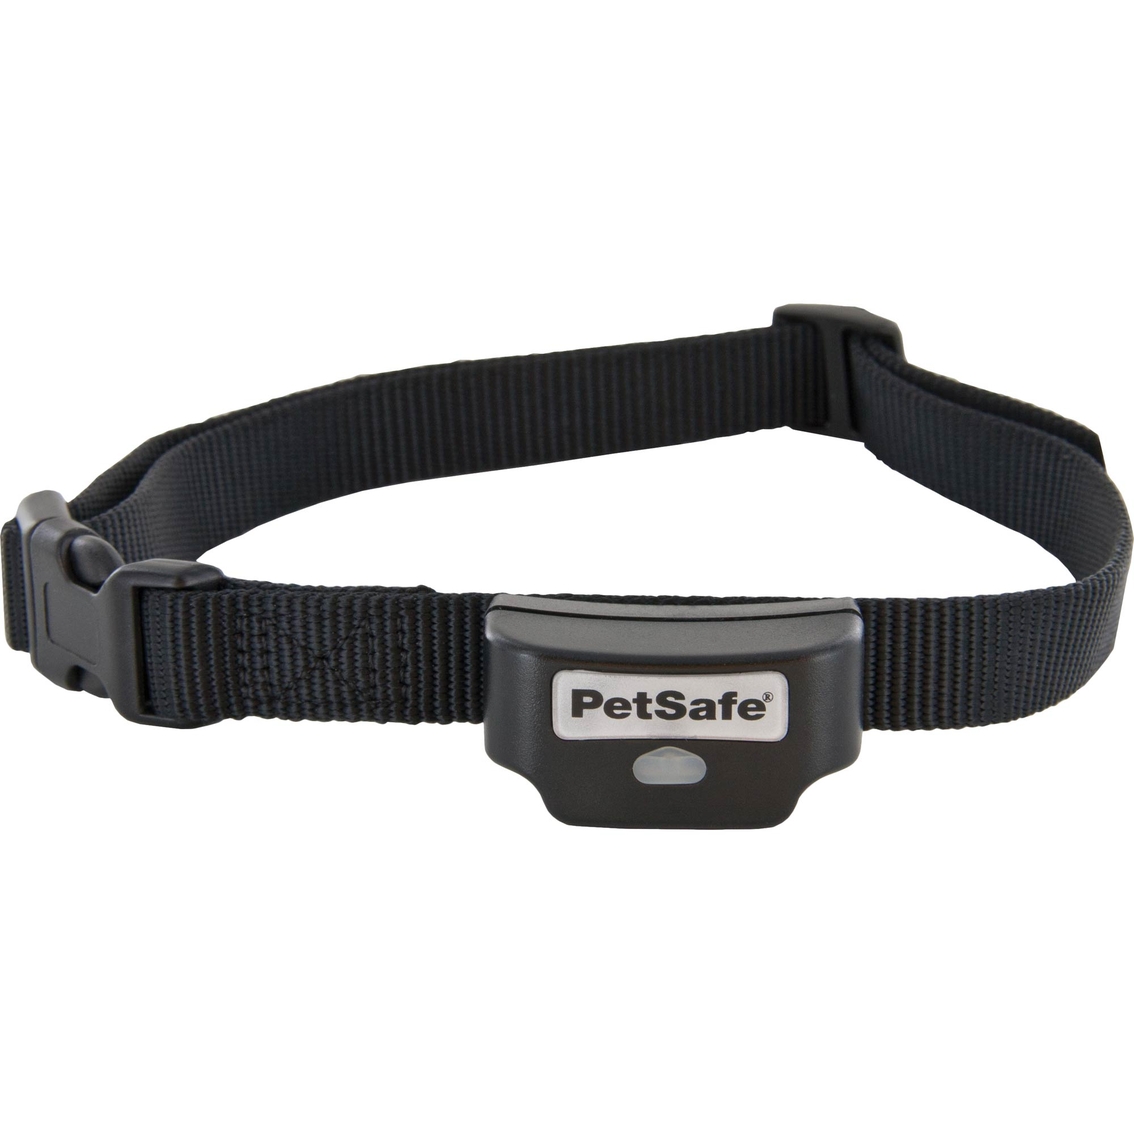 Pet Safe Rechargeable In Ground Fence Receiver Collar with Charger - Image 2 of 3